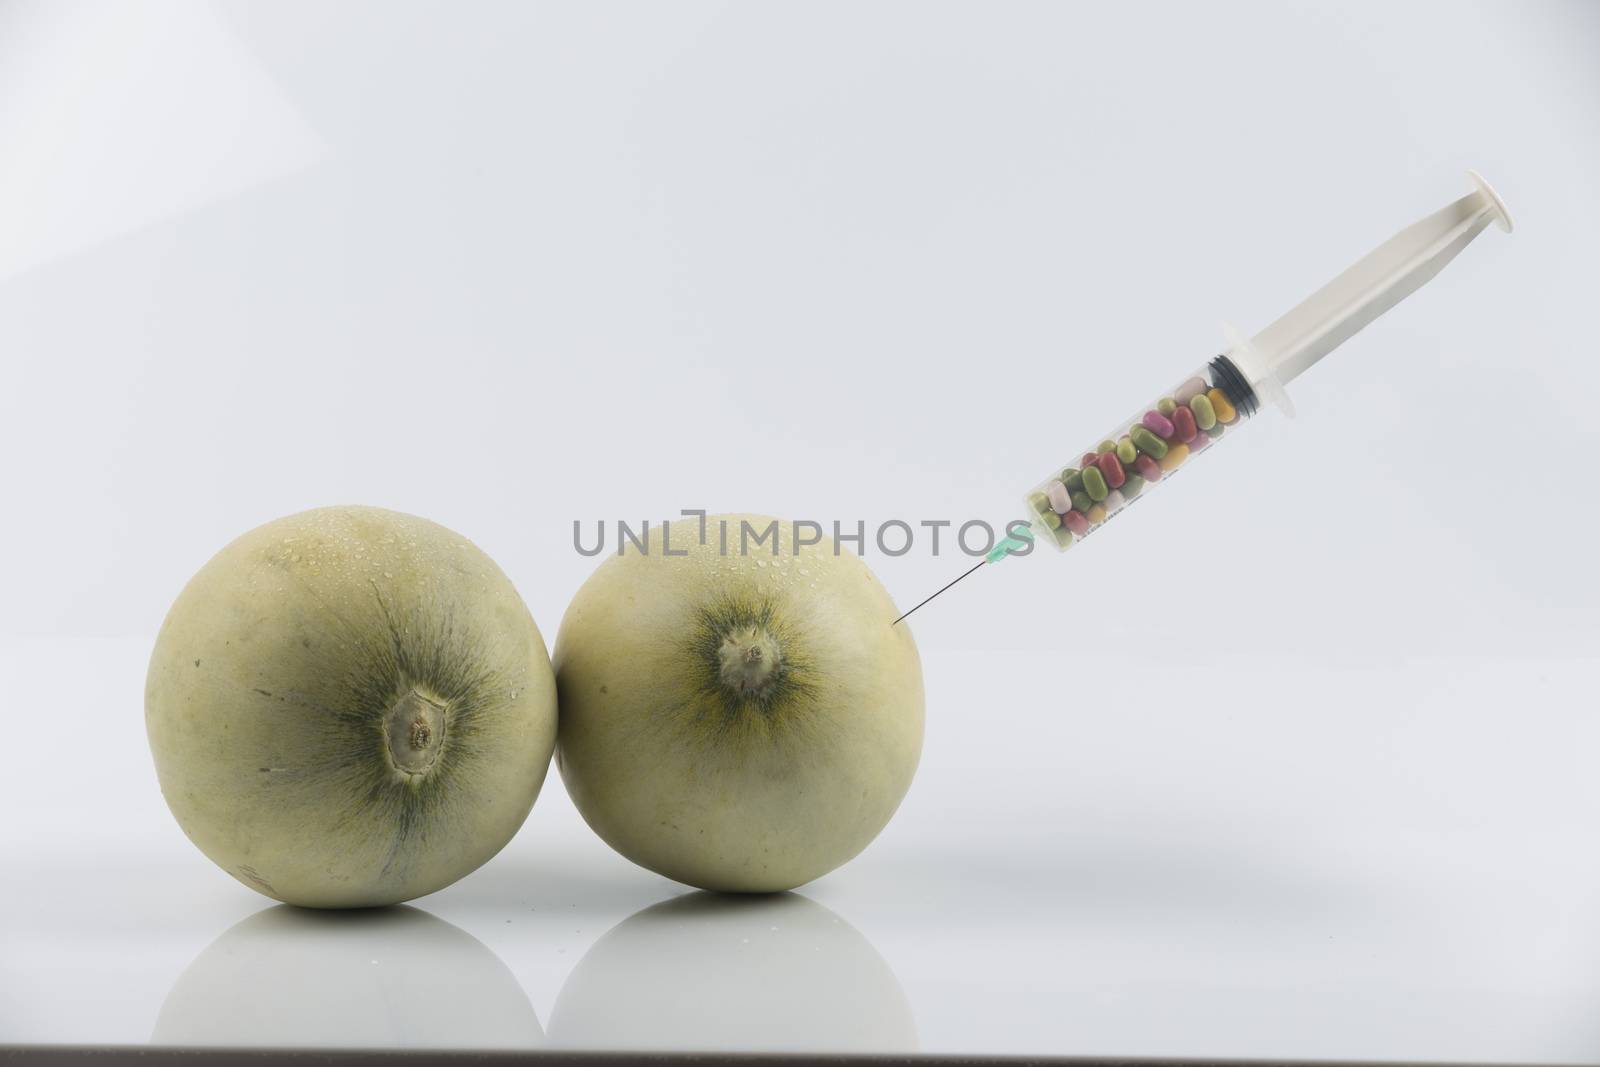 Cosmetic treatment  for Female breasts metaphor: melons and syringe with pills meaning cosmetic and health treatment